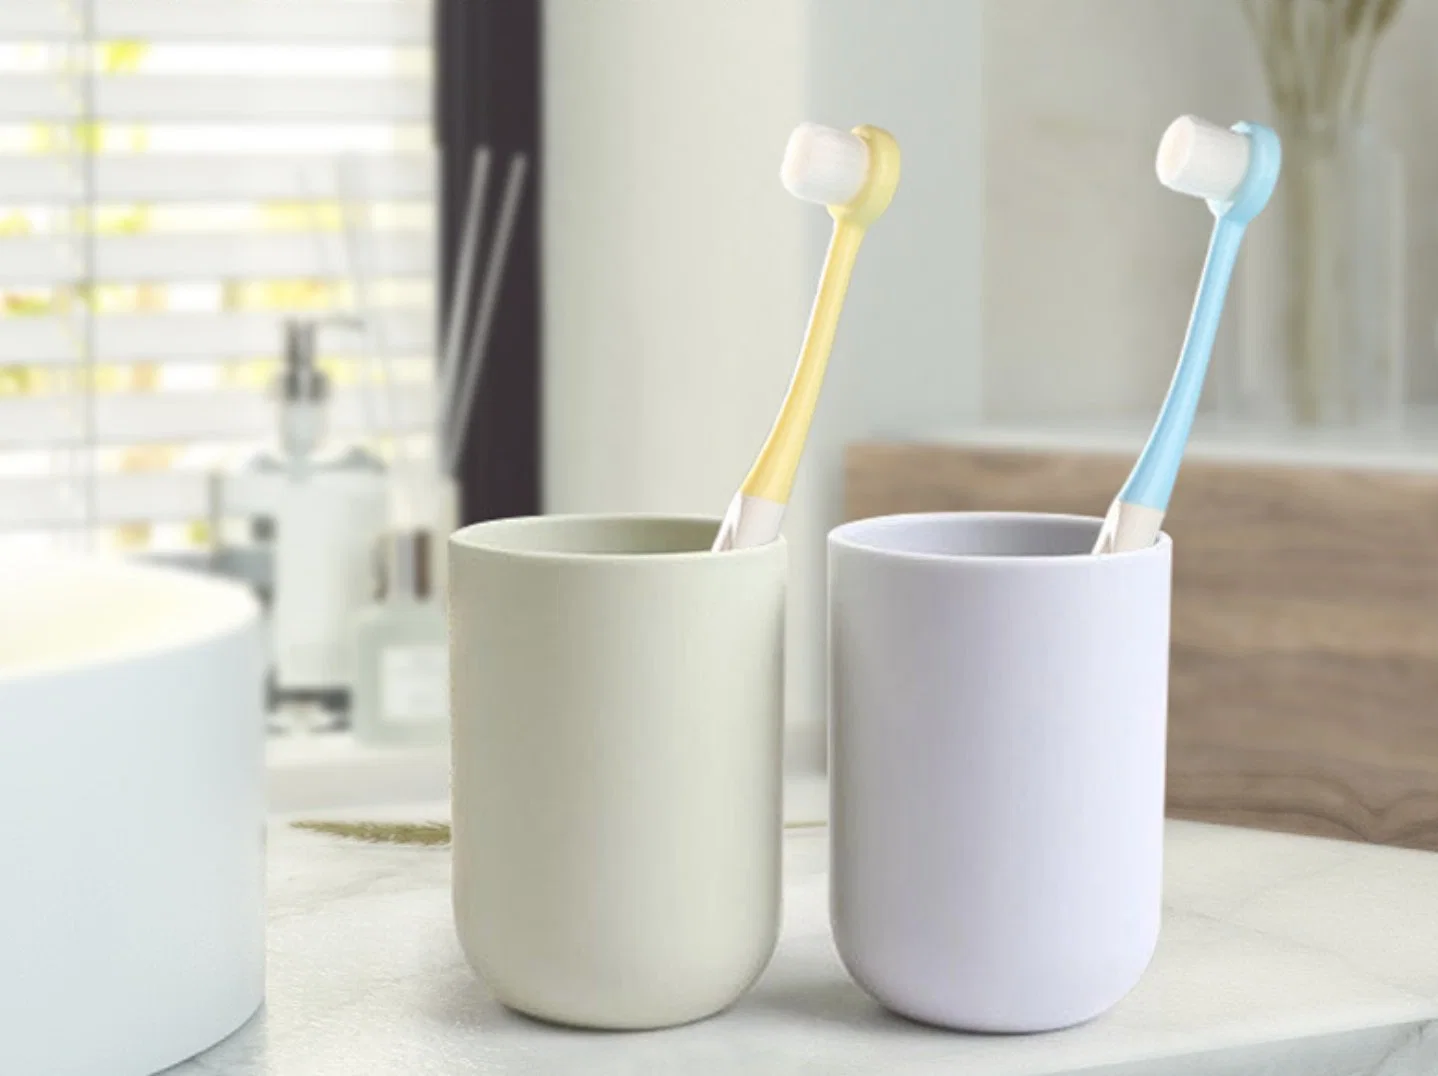 Eco-Friendly Toothbrush for Hotel Amenities